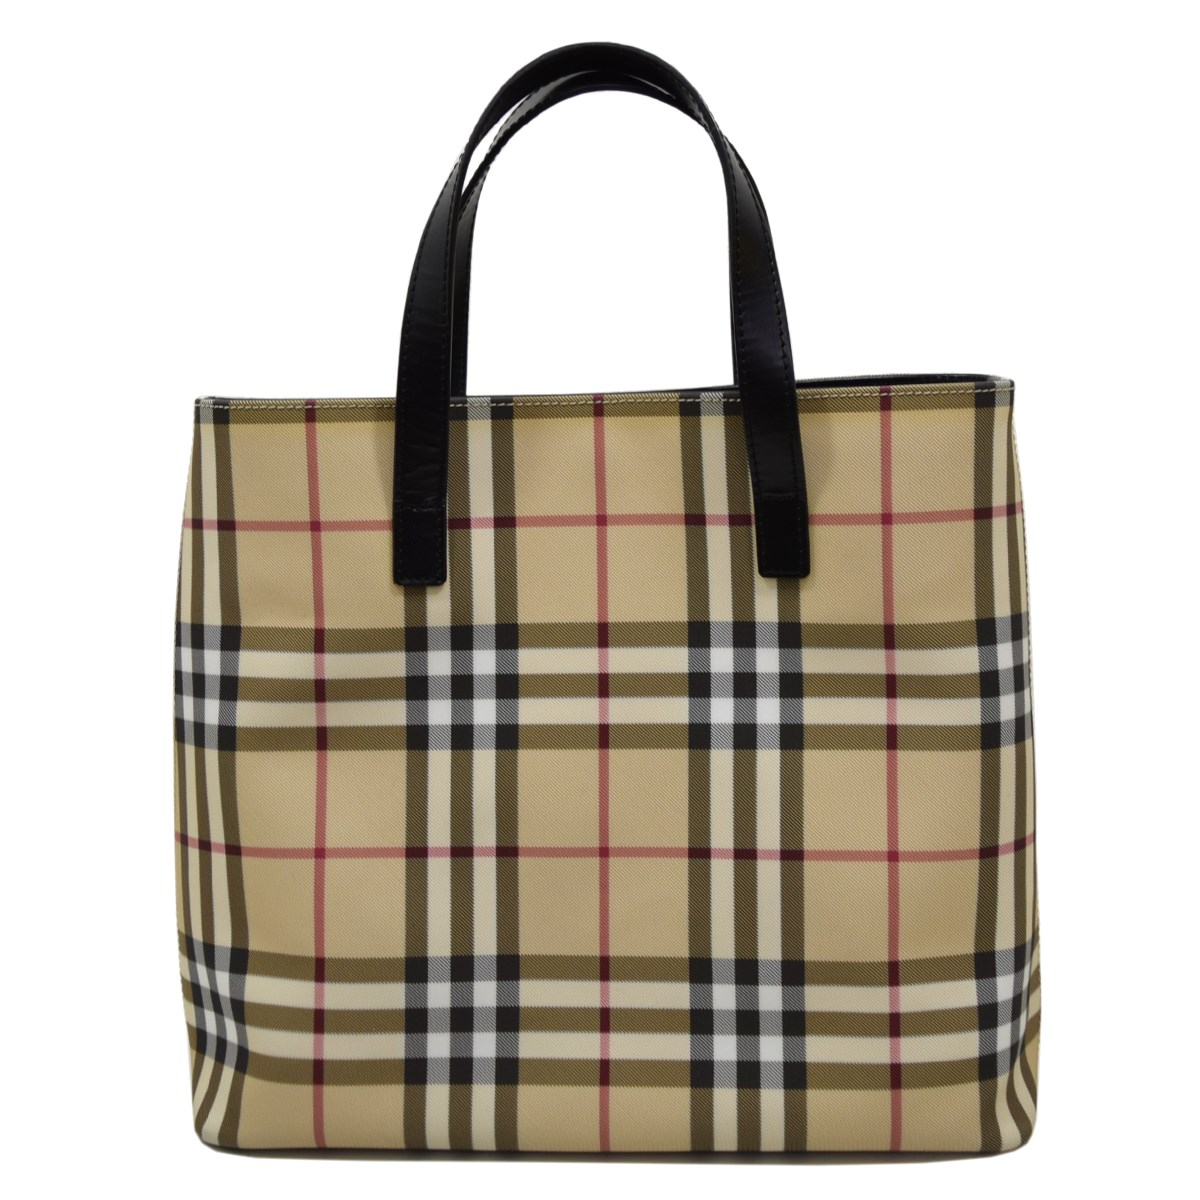 br>BURBERRY LONDON <br>PVC加工ノバチェックトートバッグ ベージュ